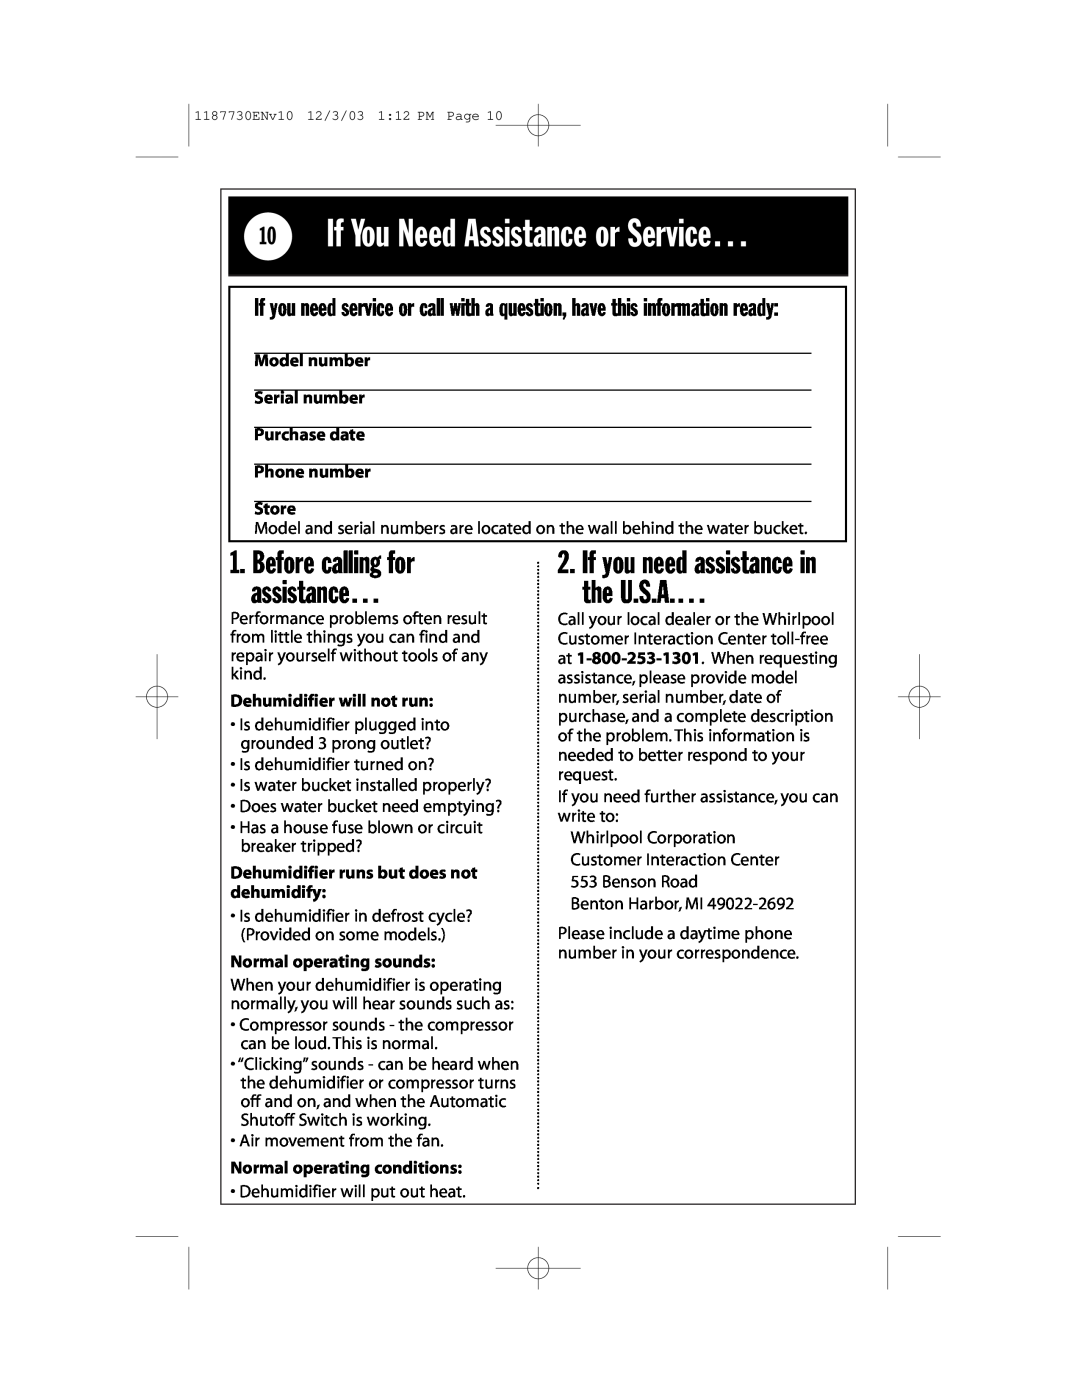 Whirlpool AD65USM2 installation instructions 10If You Need Assistance or Service…, Before calling for assistance… 